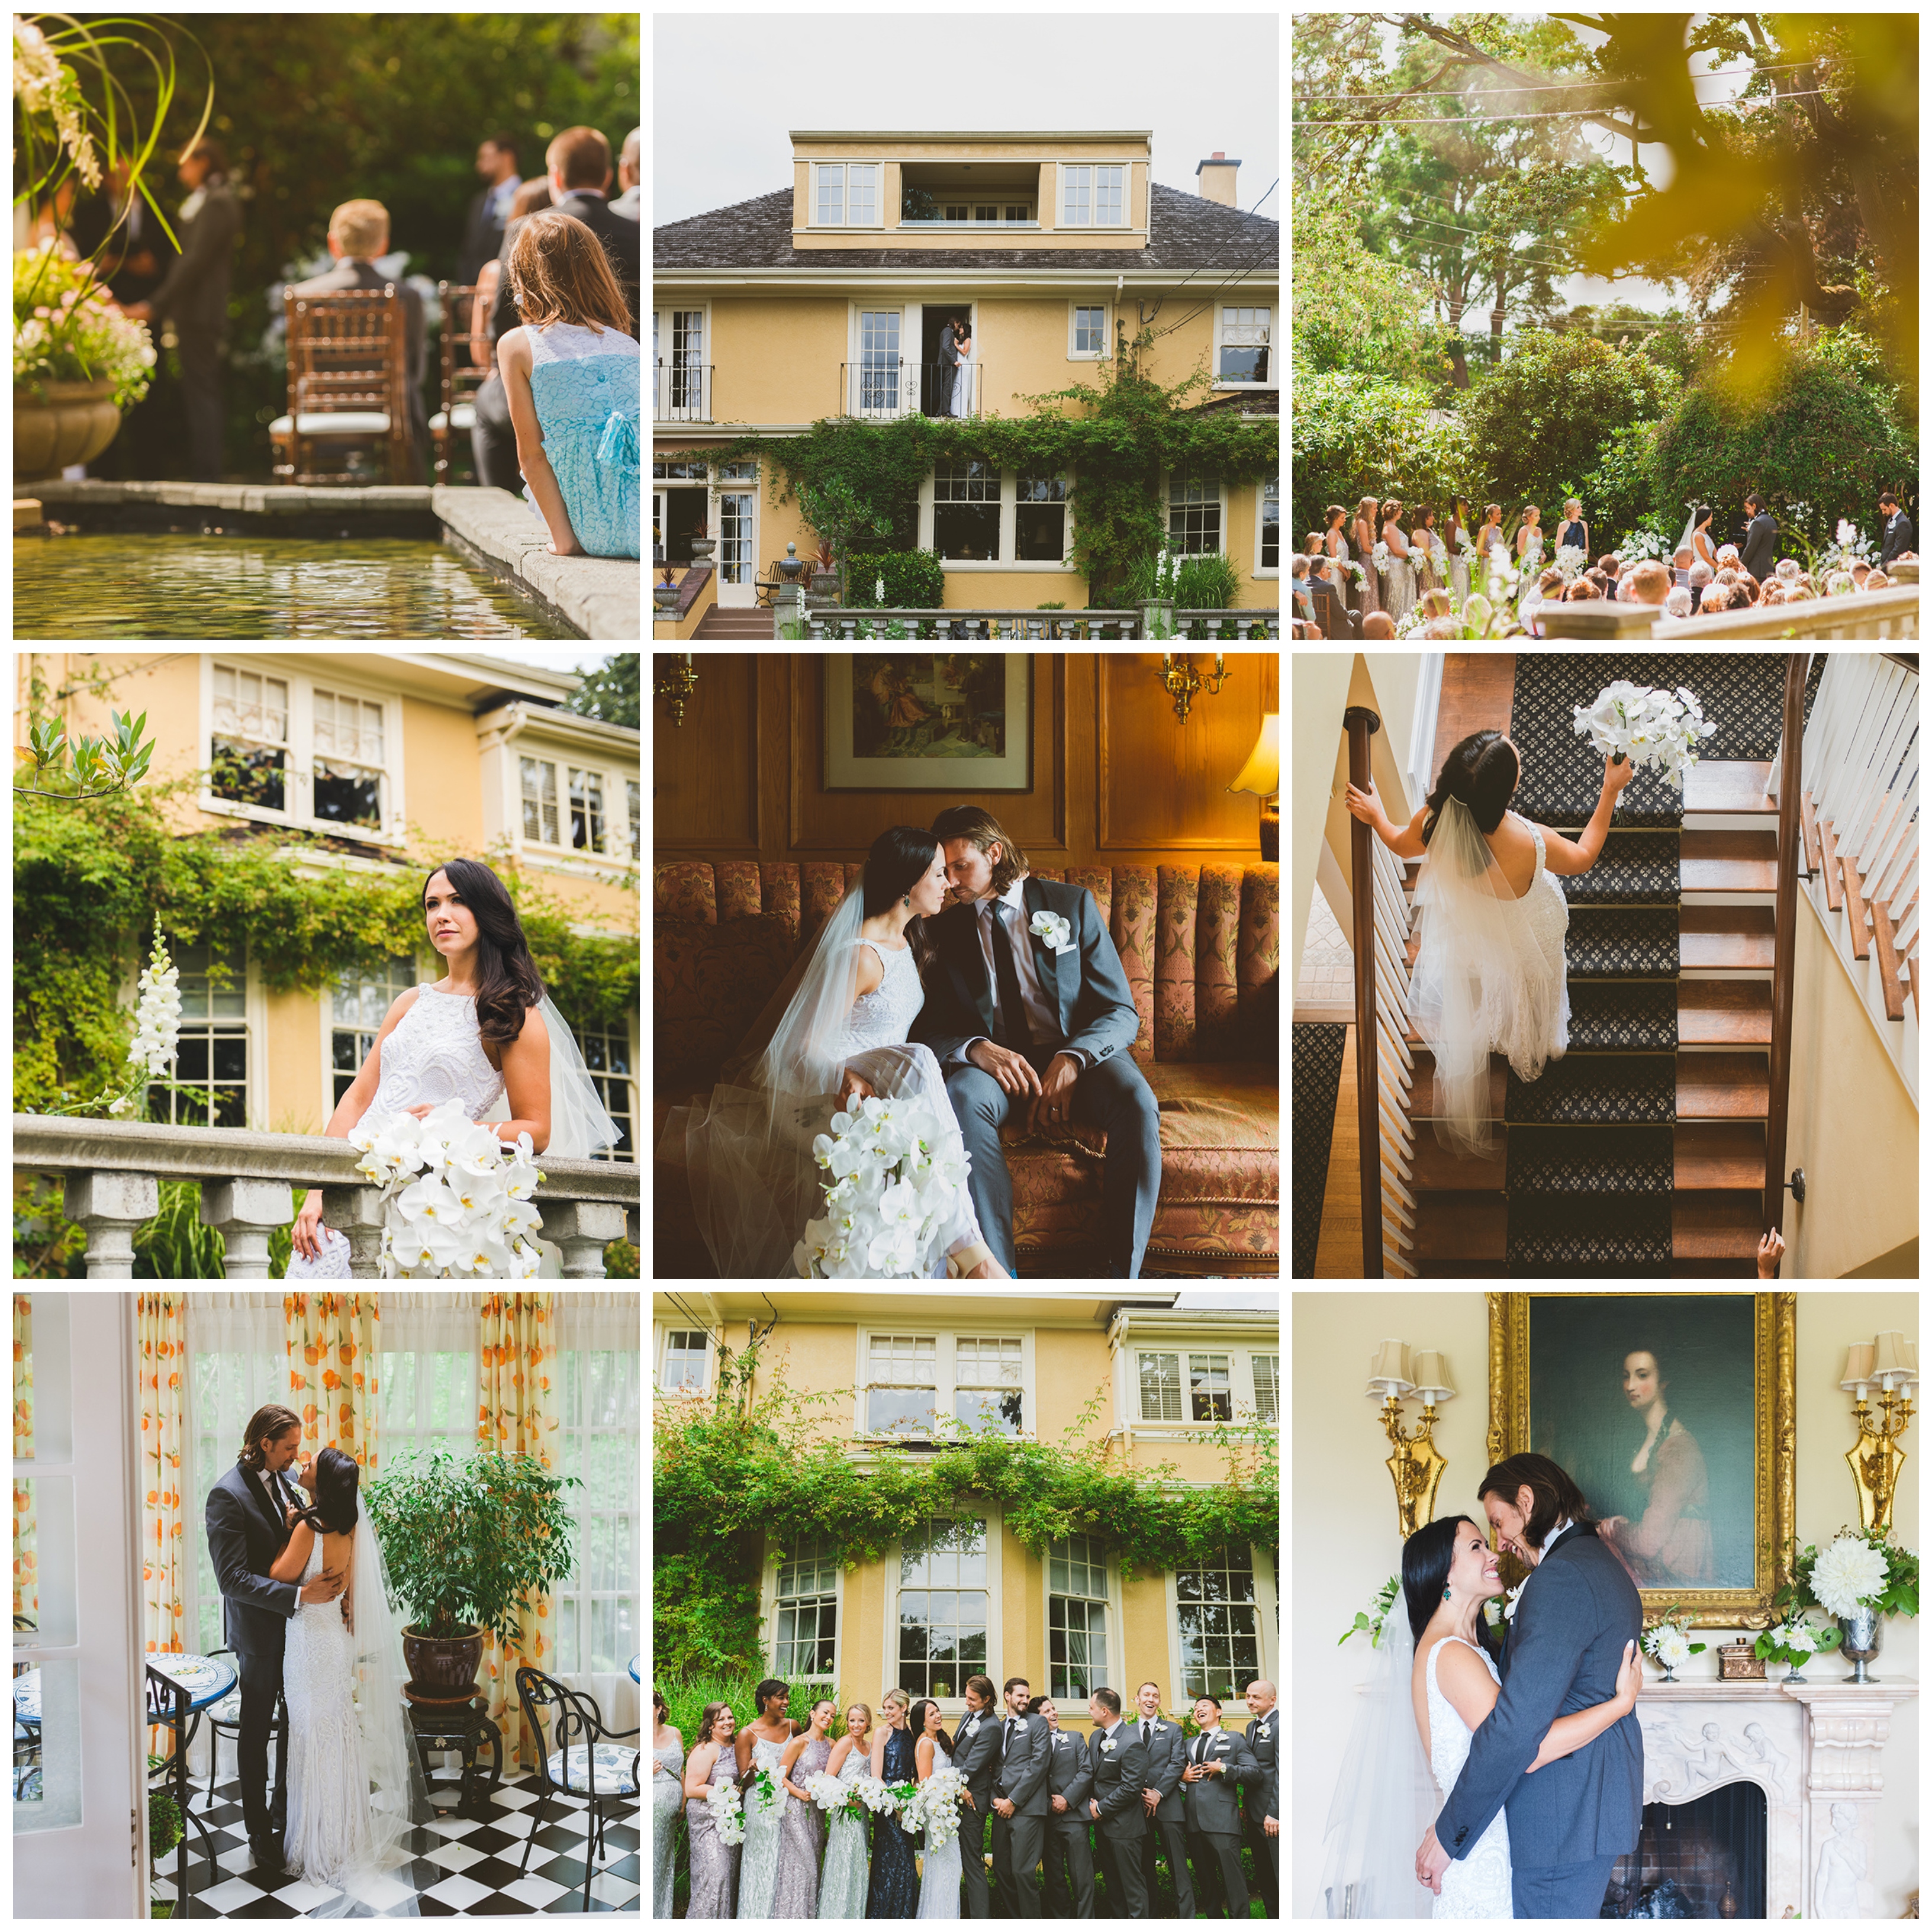 Vancouver Island's Best Wedding Venues For Artistic Imagery | Victoria BC Wedding Photographer